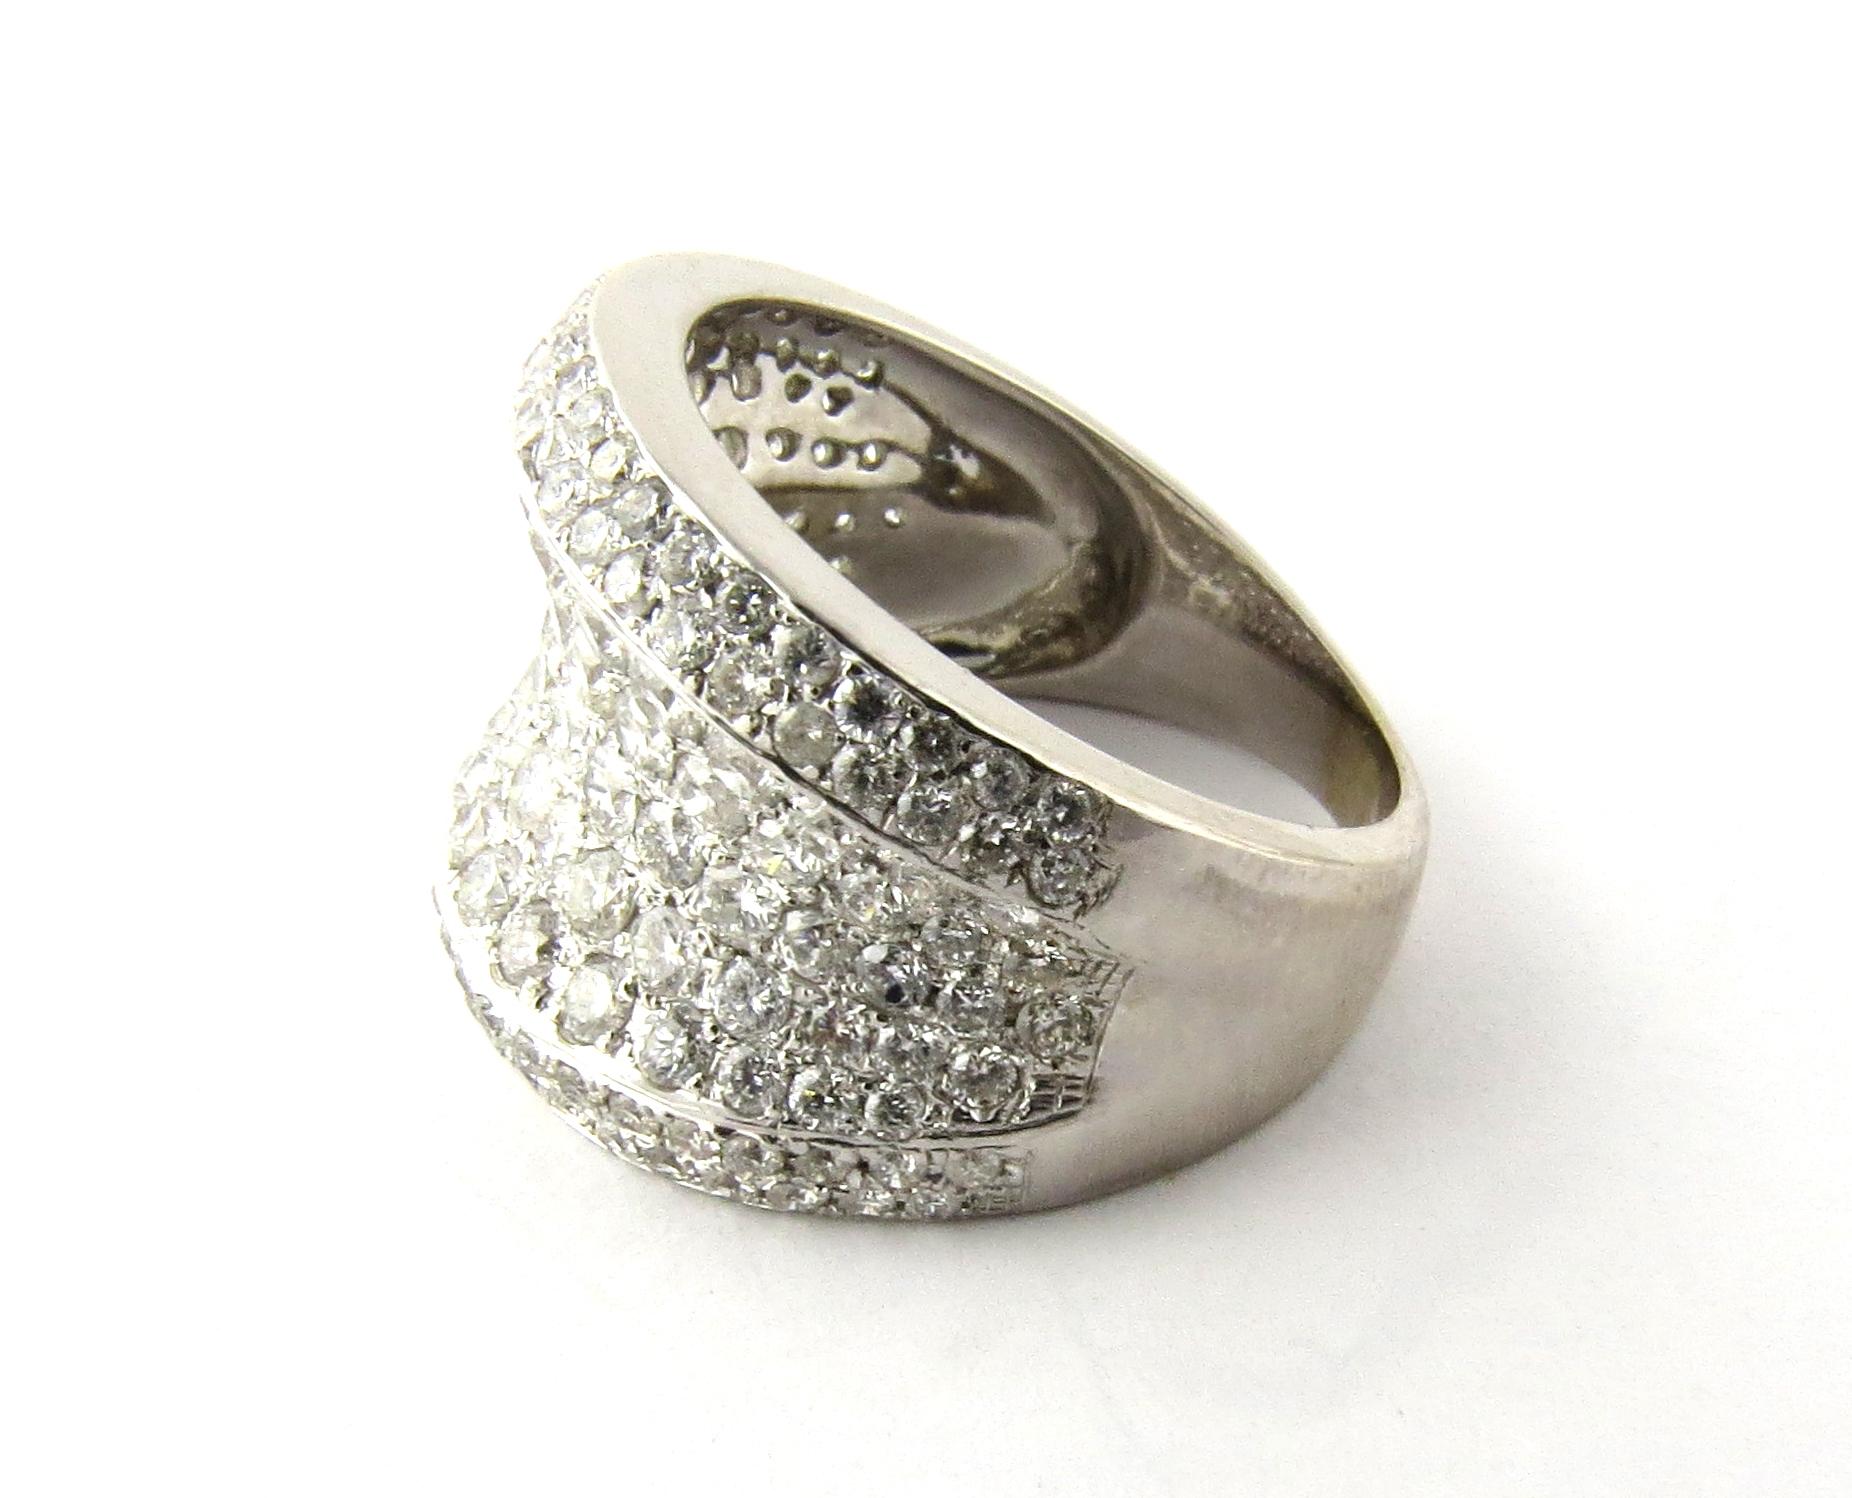 14K white gold diamond concave cigar band ring.



Tested for 14k gold purity.

No marks or hallmarks.



Size 6 1/2.

16mm wide.

3mm wide shank.



Round brilliant cut diamonds:

90 x approx. .01ct

79 x approx. .03ct

Approx. diamond twt =